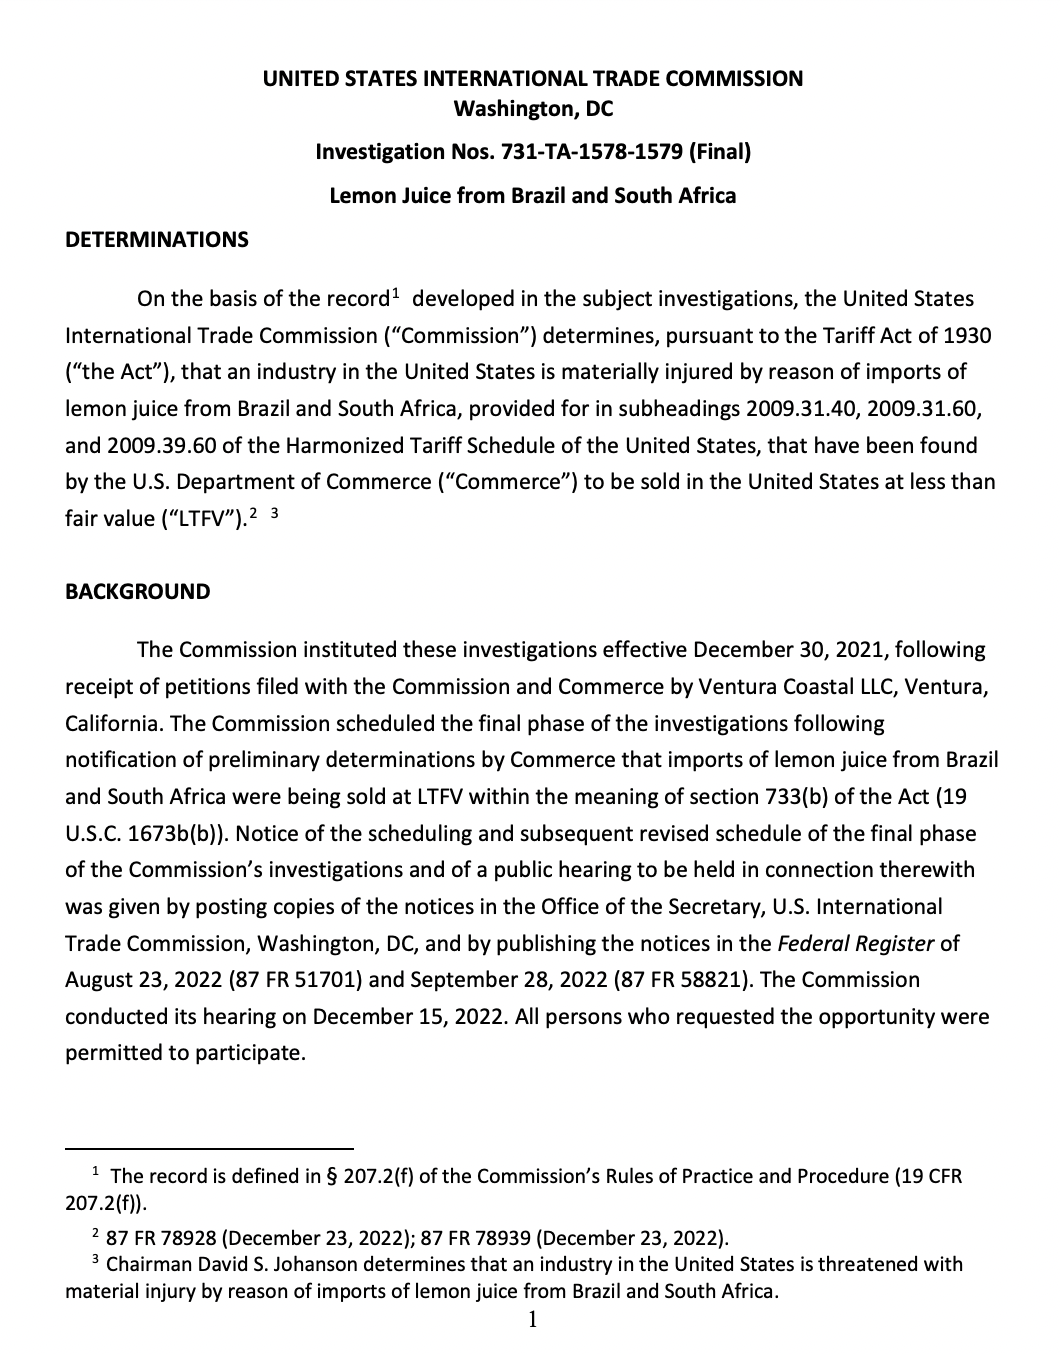 USITC - Investigation Nos. 731-TA-1578-1579 (Final) - Lemon Juice from Brazil and South Africa